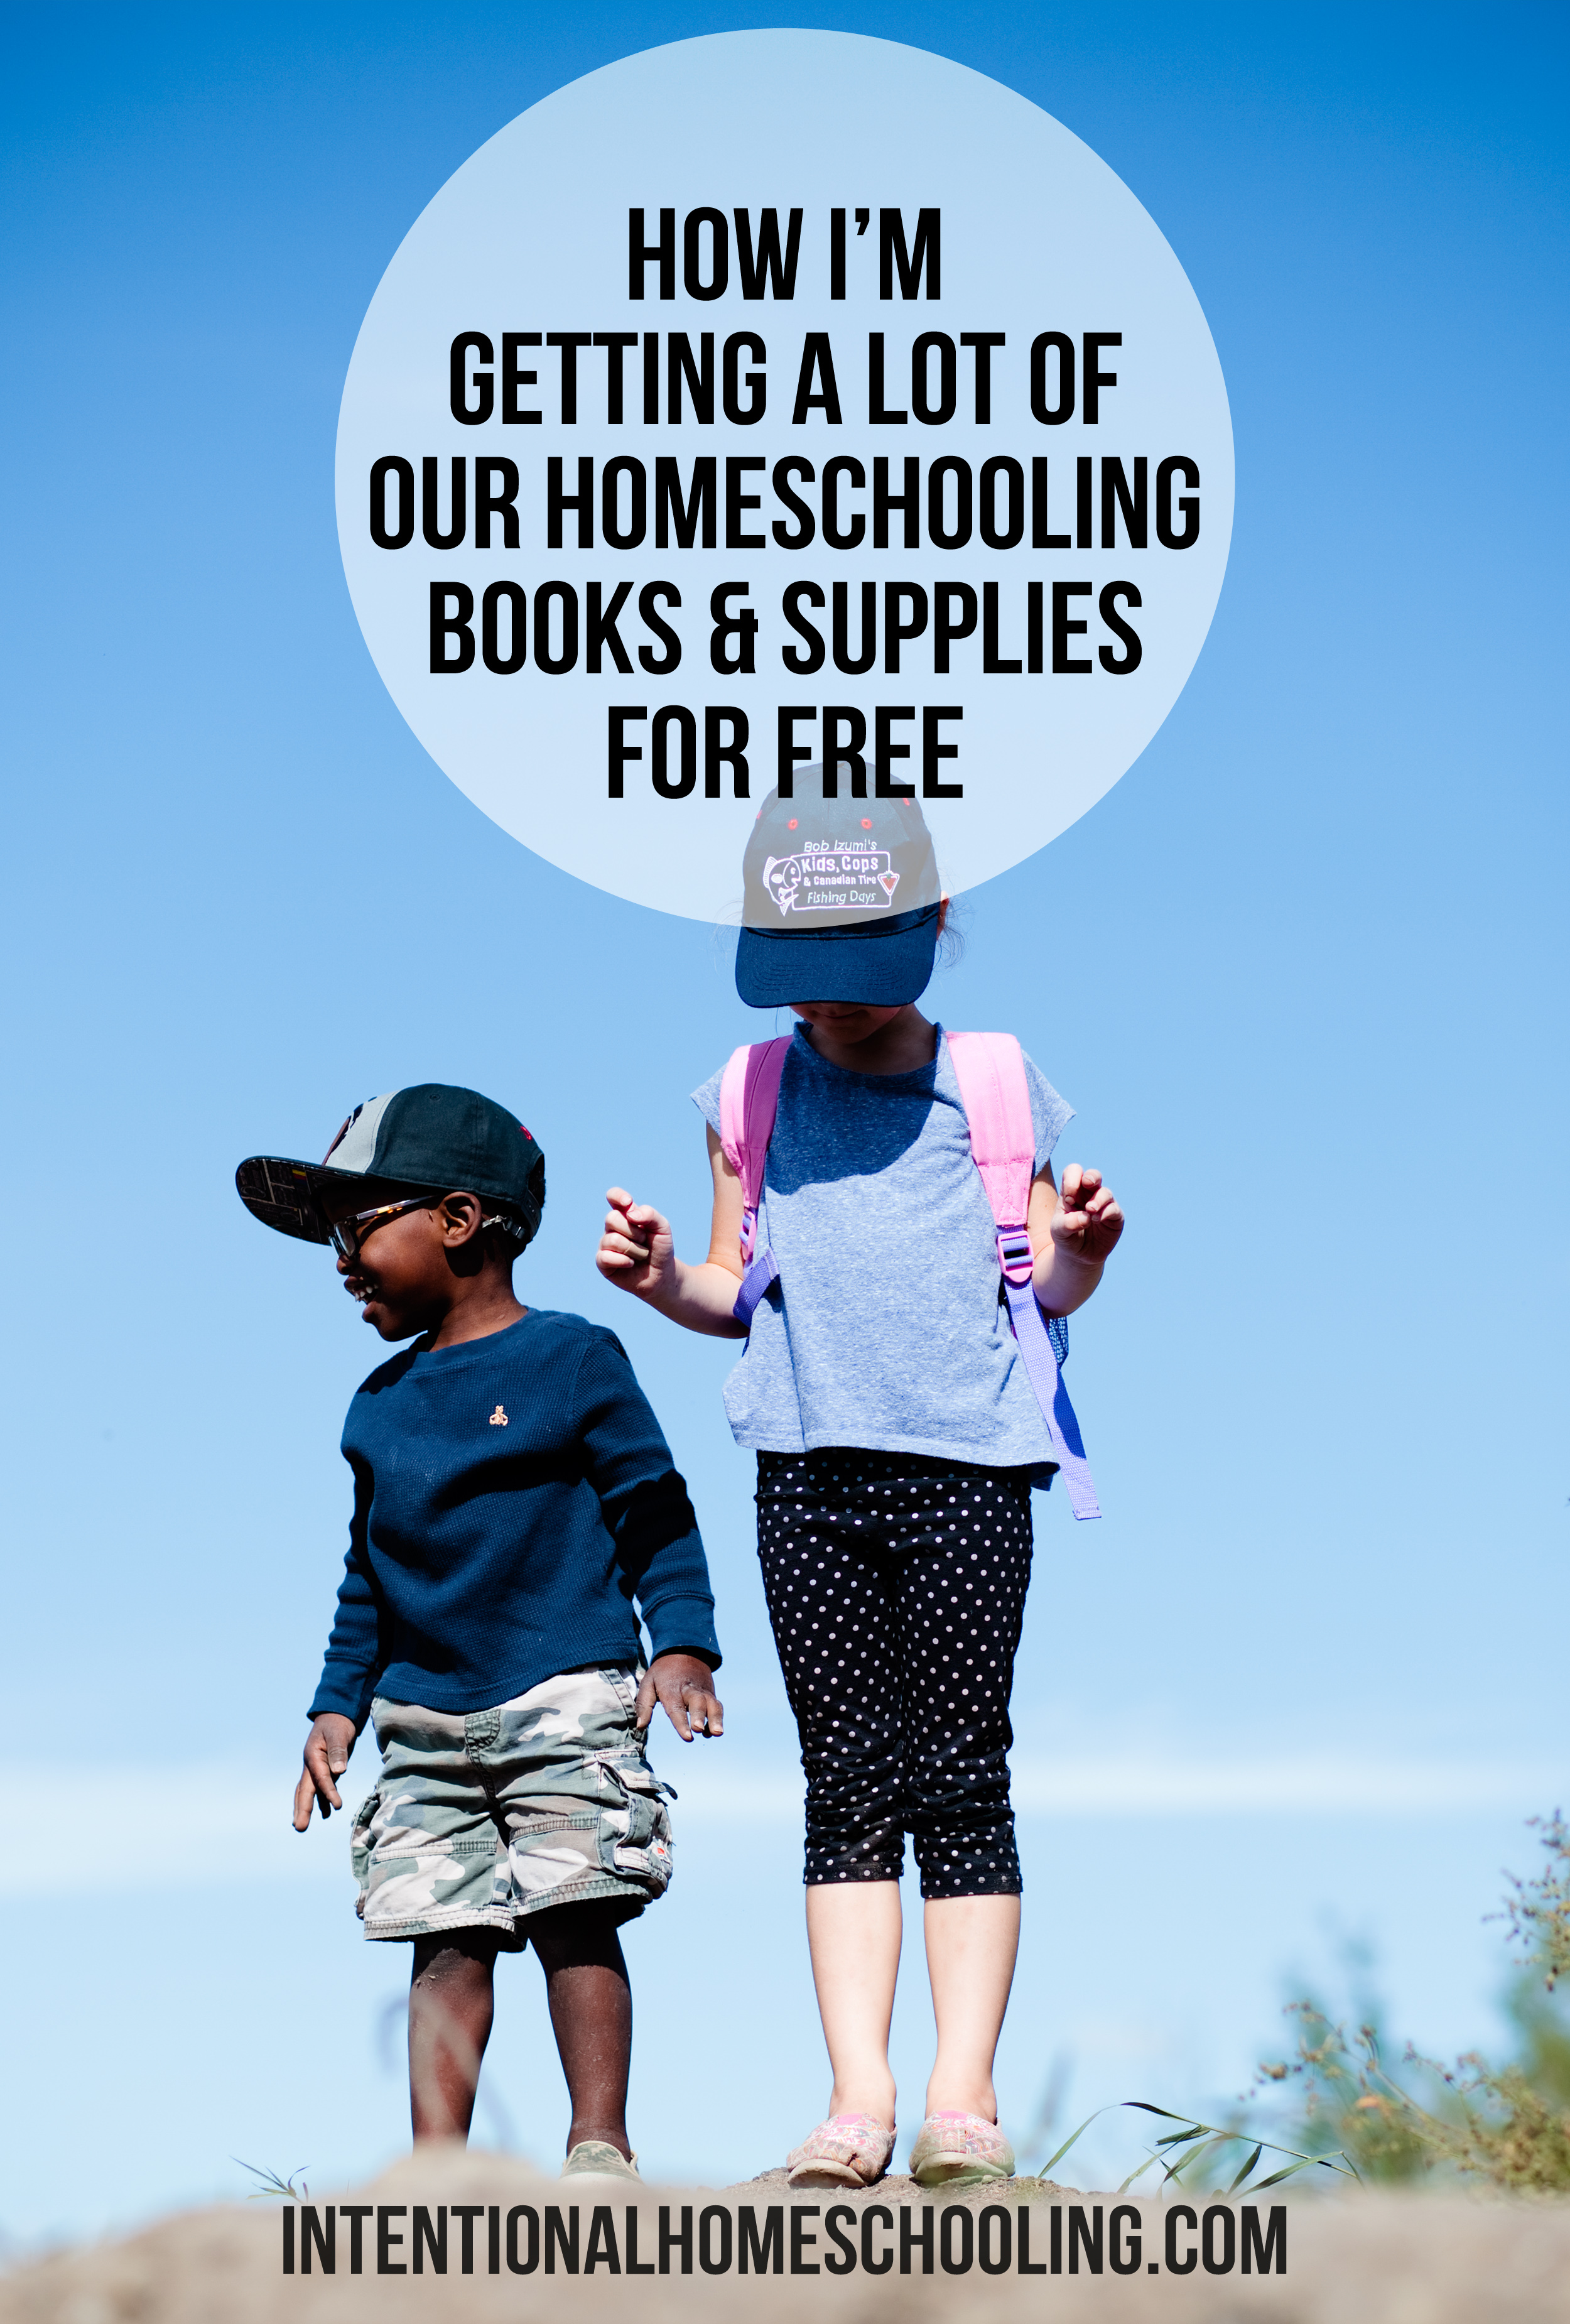 How I'm getting tons of homeschool supplies for free this year.